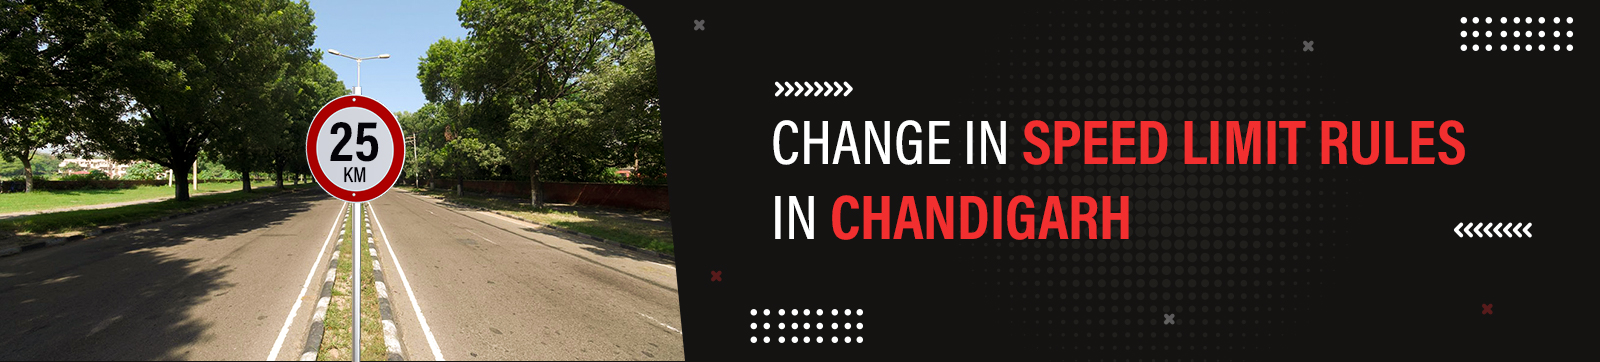 Change in Speed Limit Rules in Chandigarh, Drive Vehicles Outside Schools and Hospitals at the Speed of 25 Km/Hour